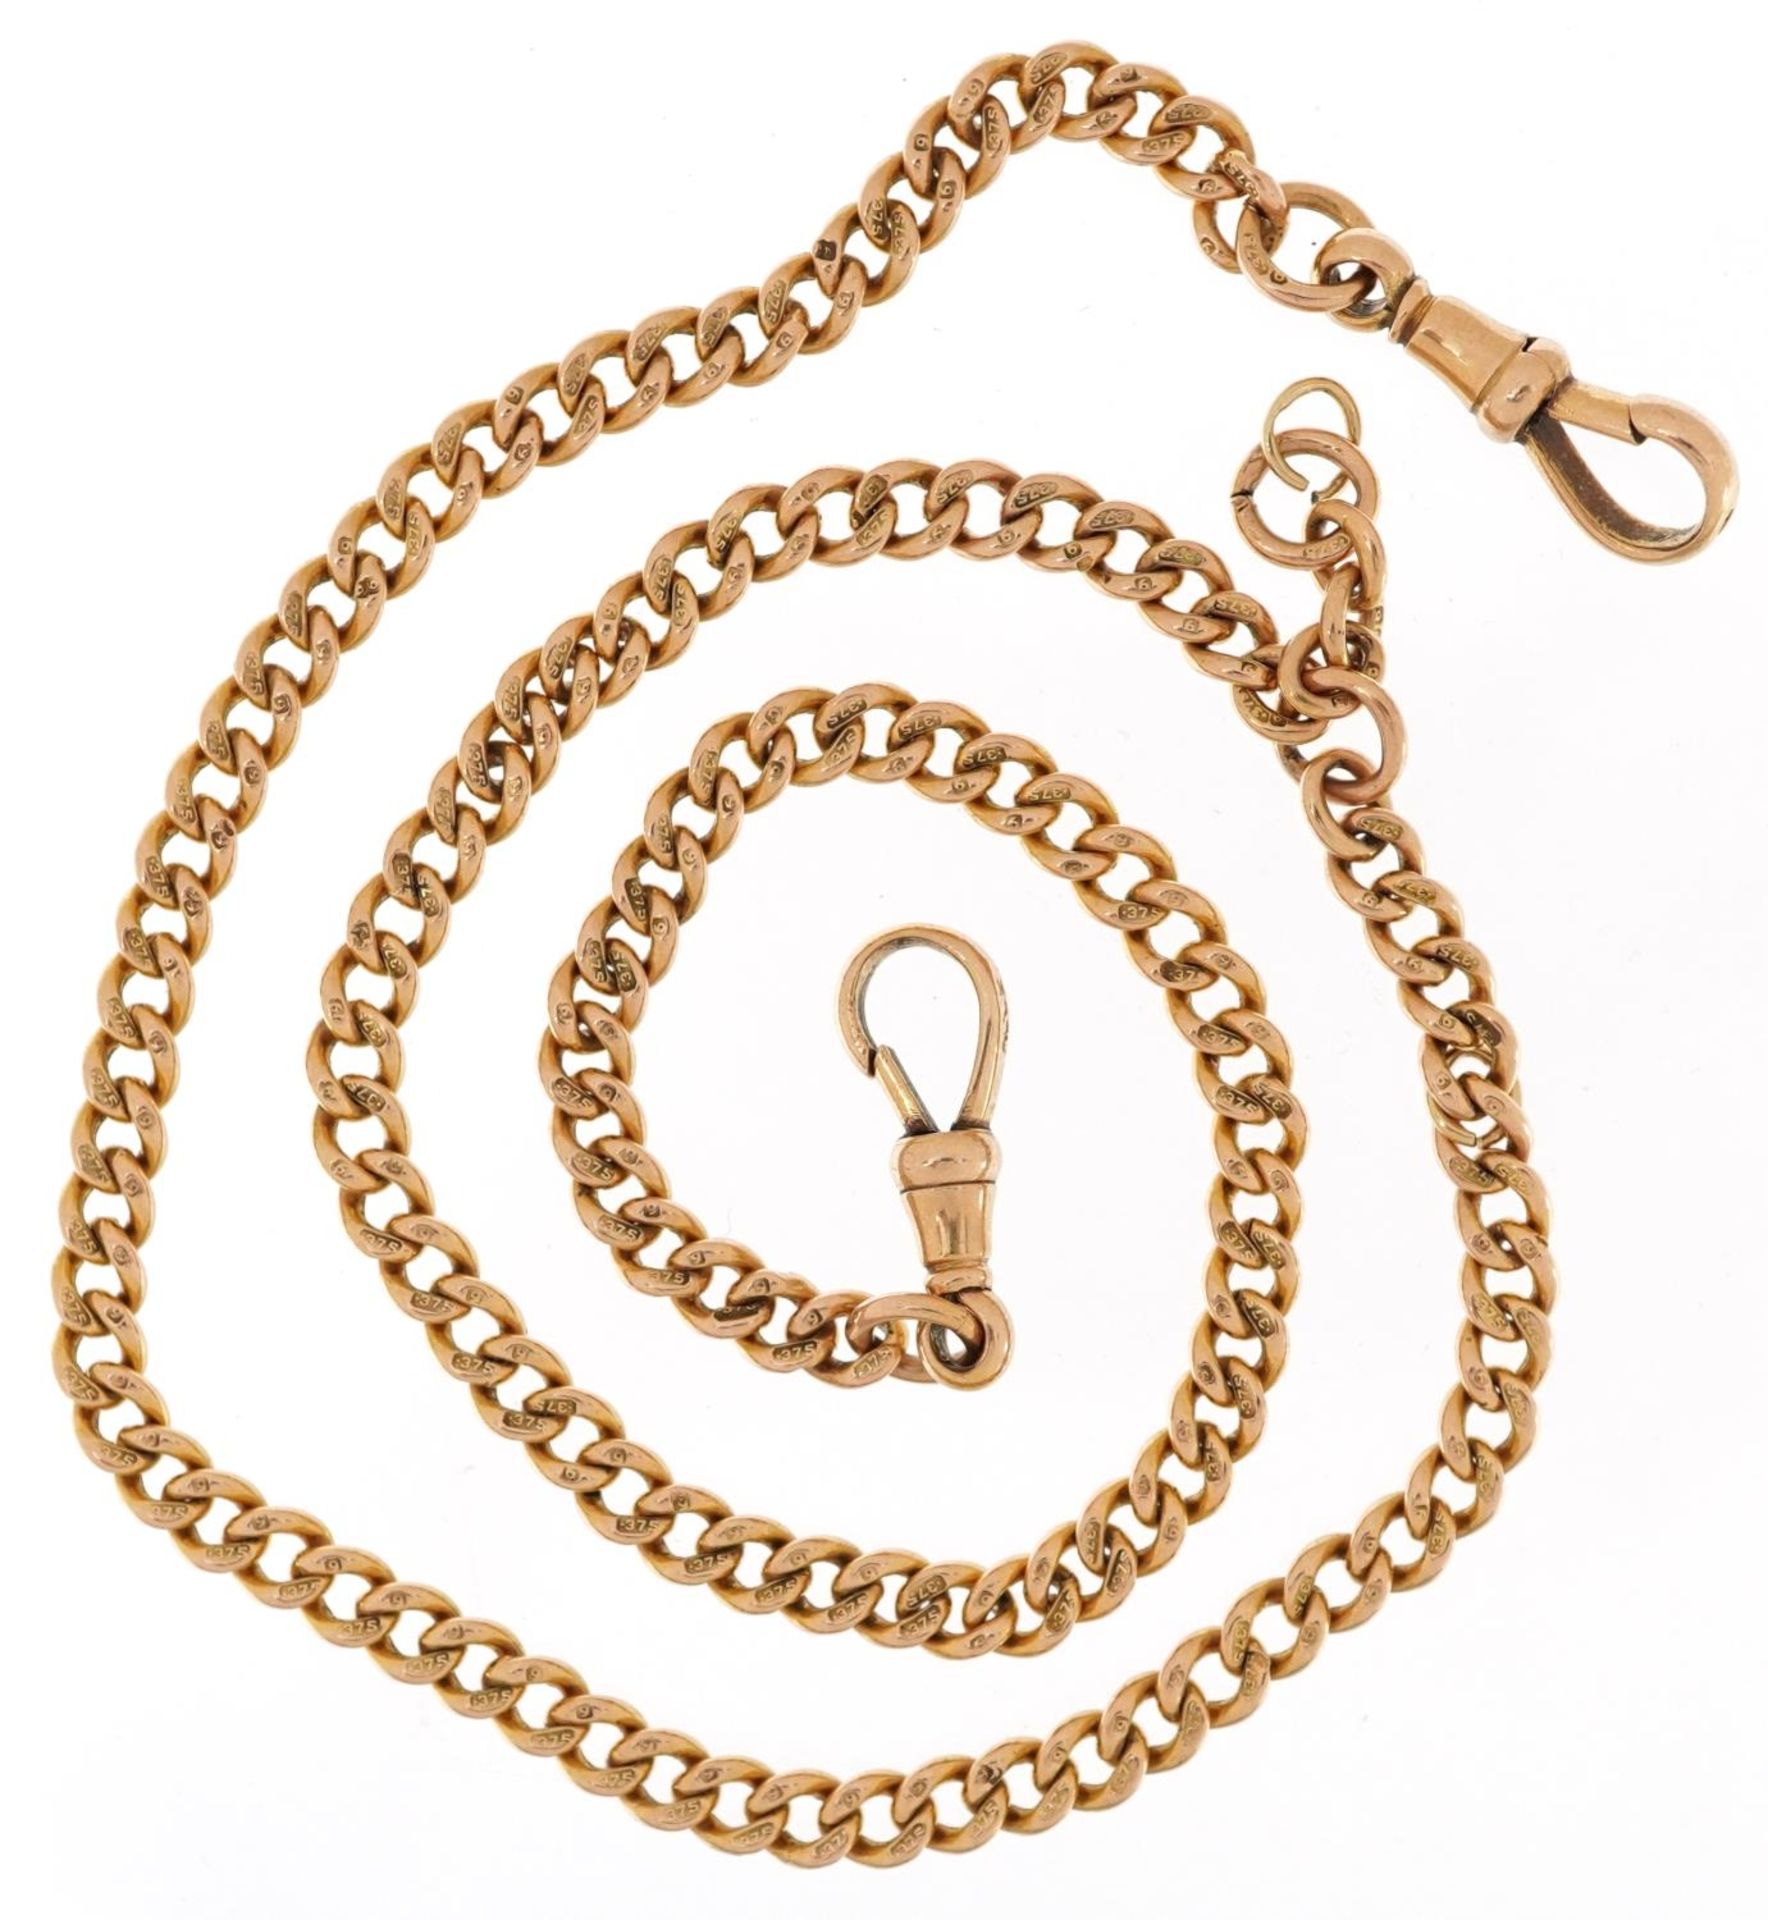 9ct gold watch chain with dog clip clasps, 43cm in length, 21.8g - Image 2 of 3